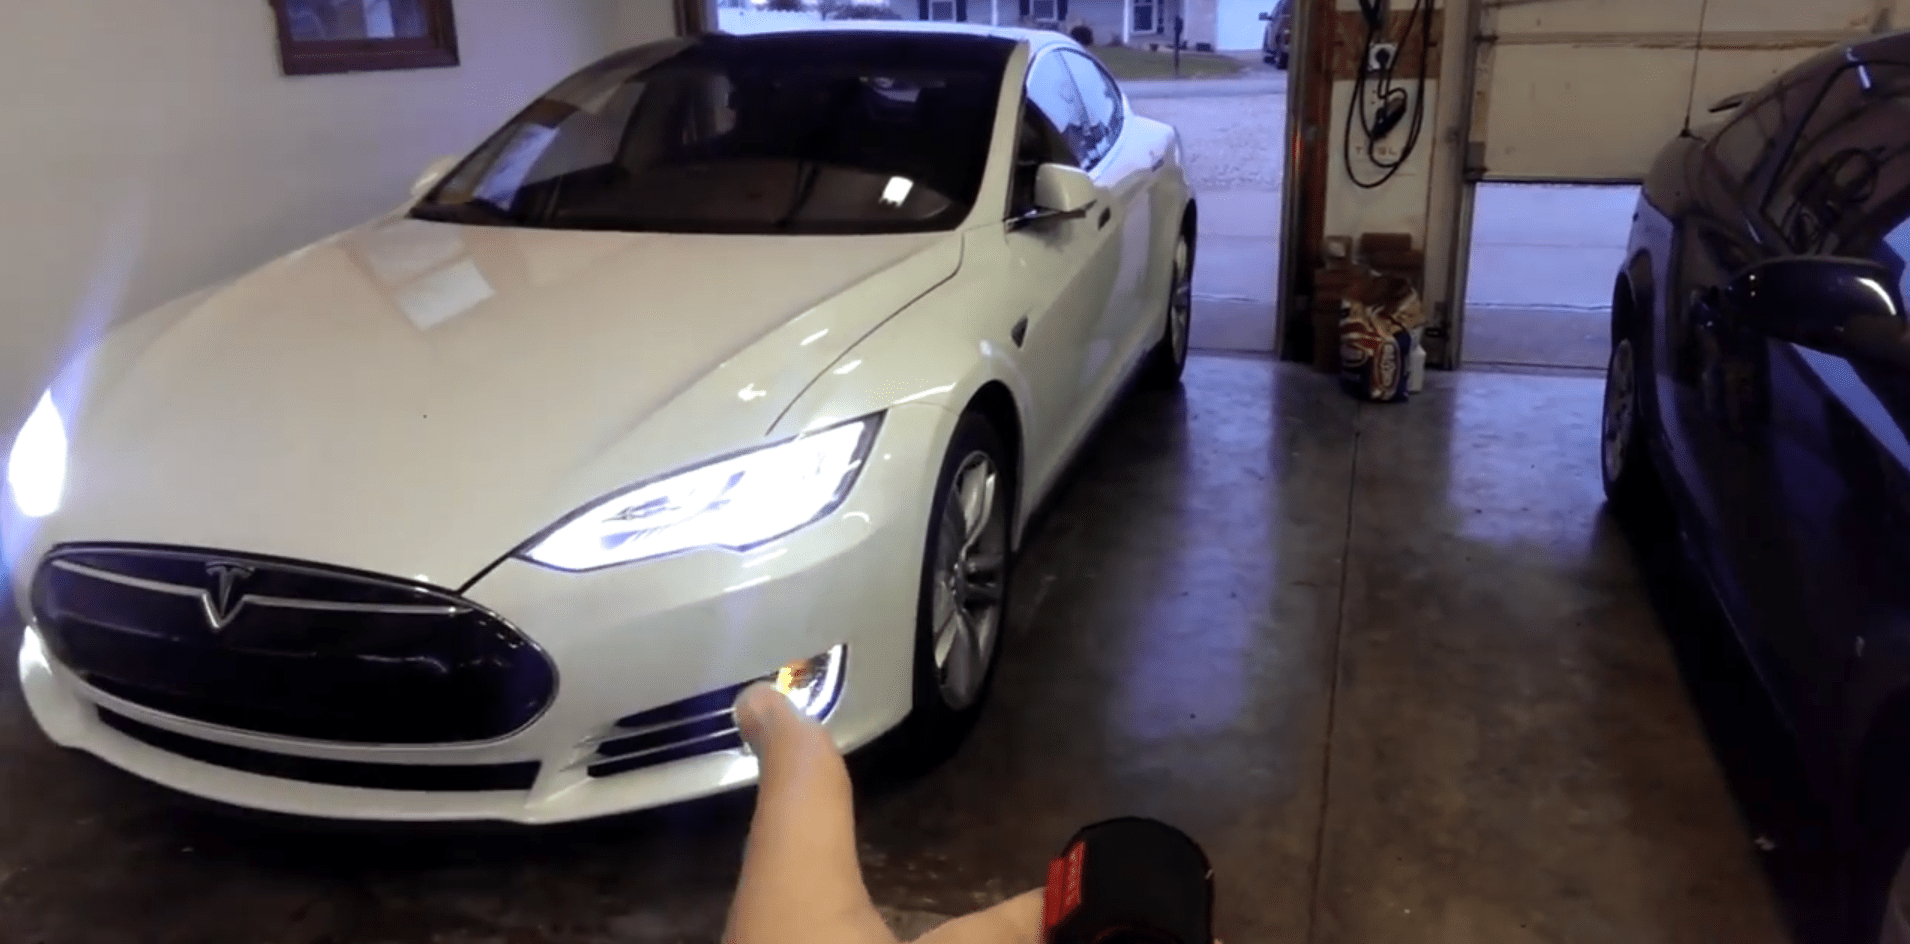 Hacking a Tesla Model S: What We Found and What We Learned